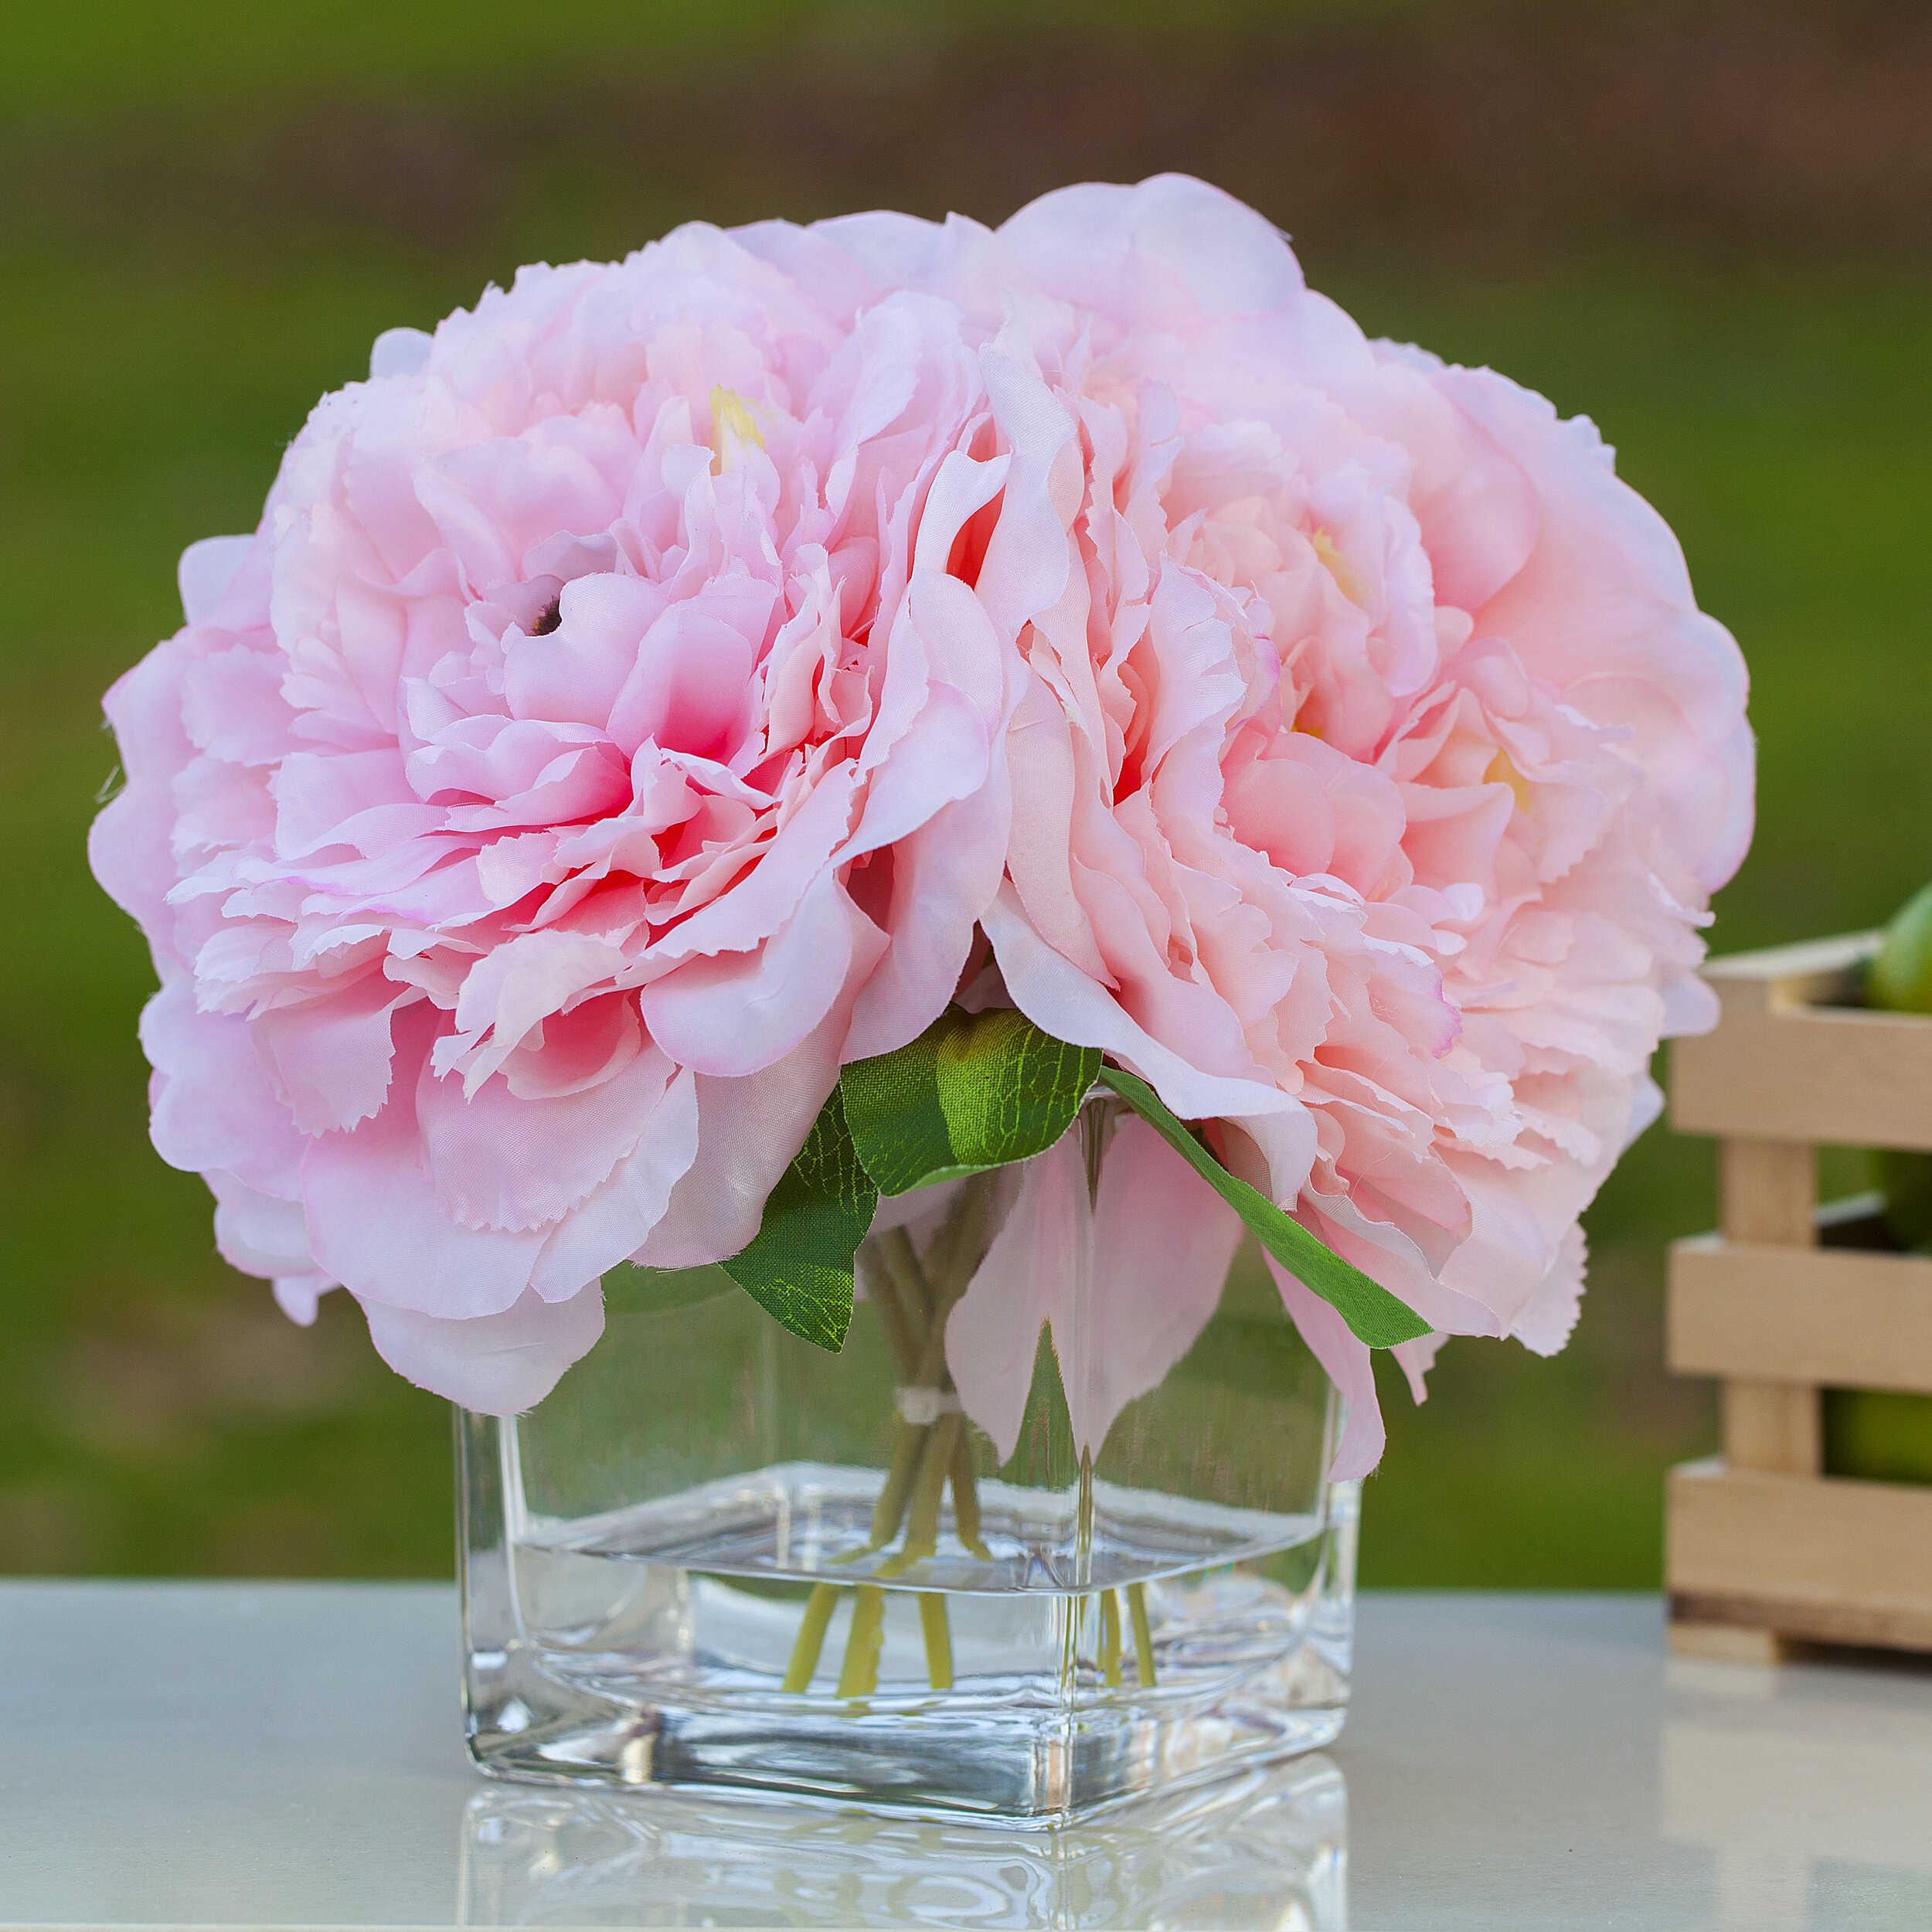 and Peach Petals for a Beautiful Real Look Pink Silk Perennial Peonies Layers of Petals Combine Hues of Mauve Handcrafted Artificial Peony Silk Flower Arrangement in Vase Natural Look Pink